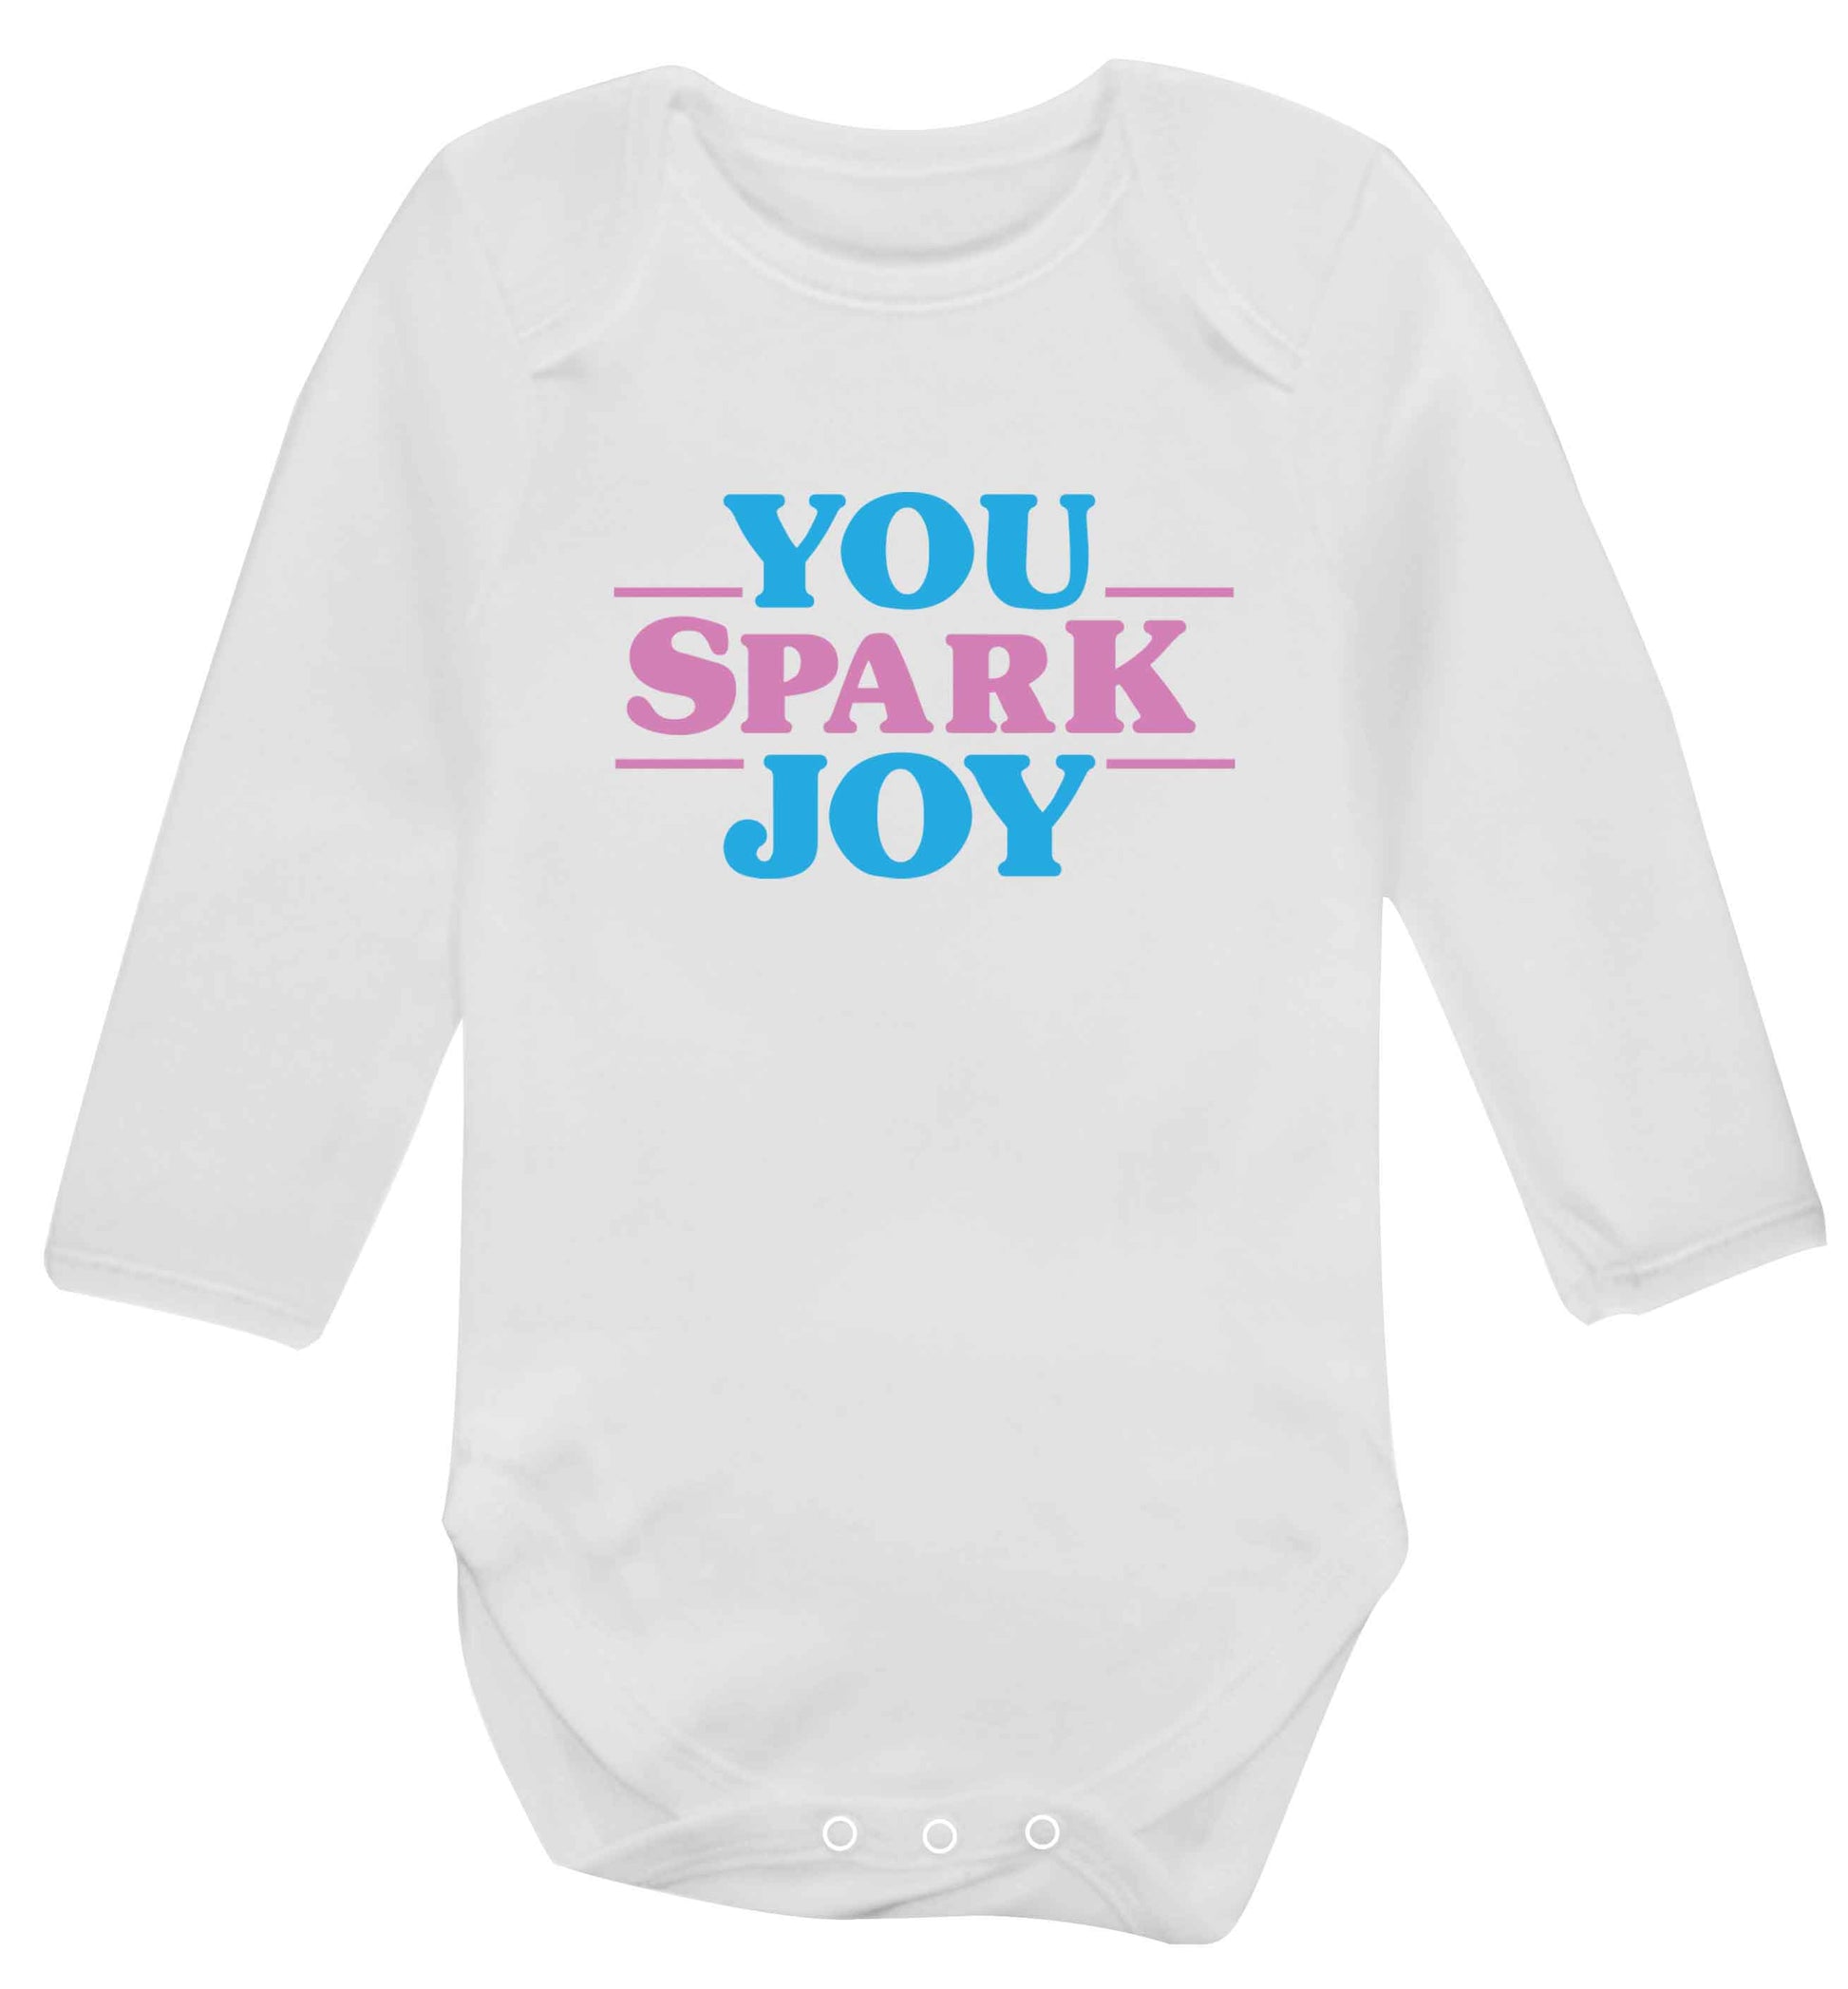 You spark joy baby vest long sleeved white 6-12 months